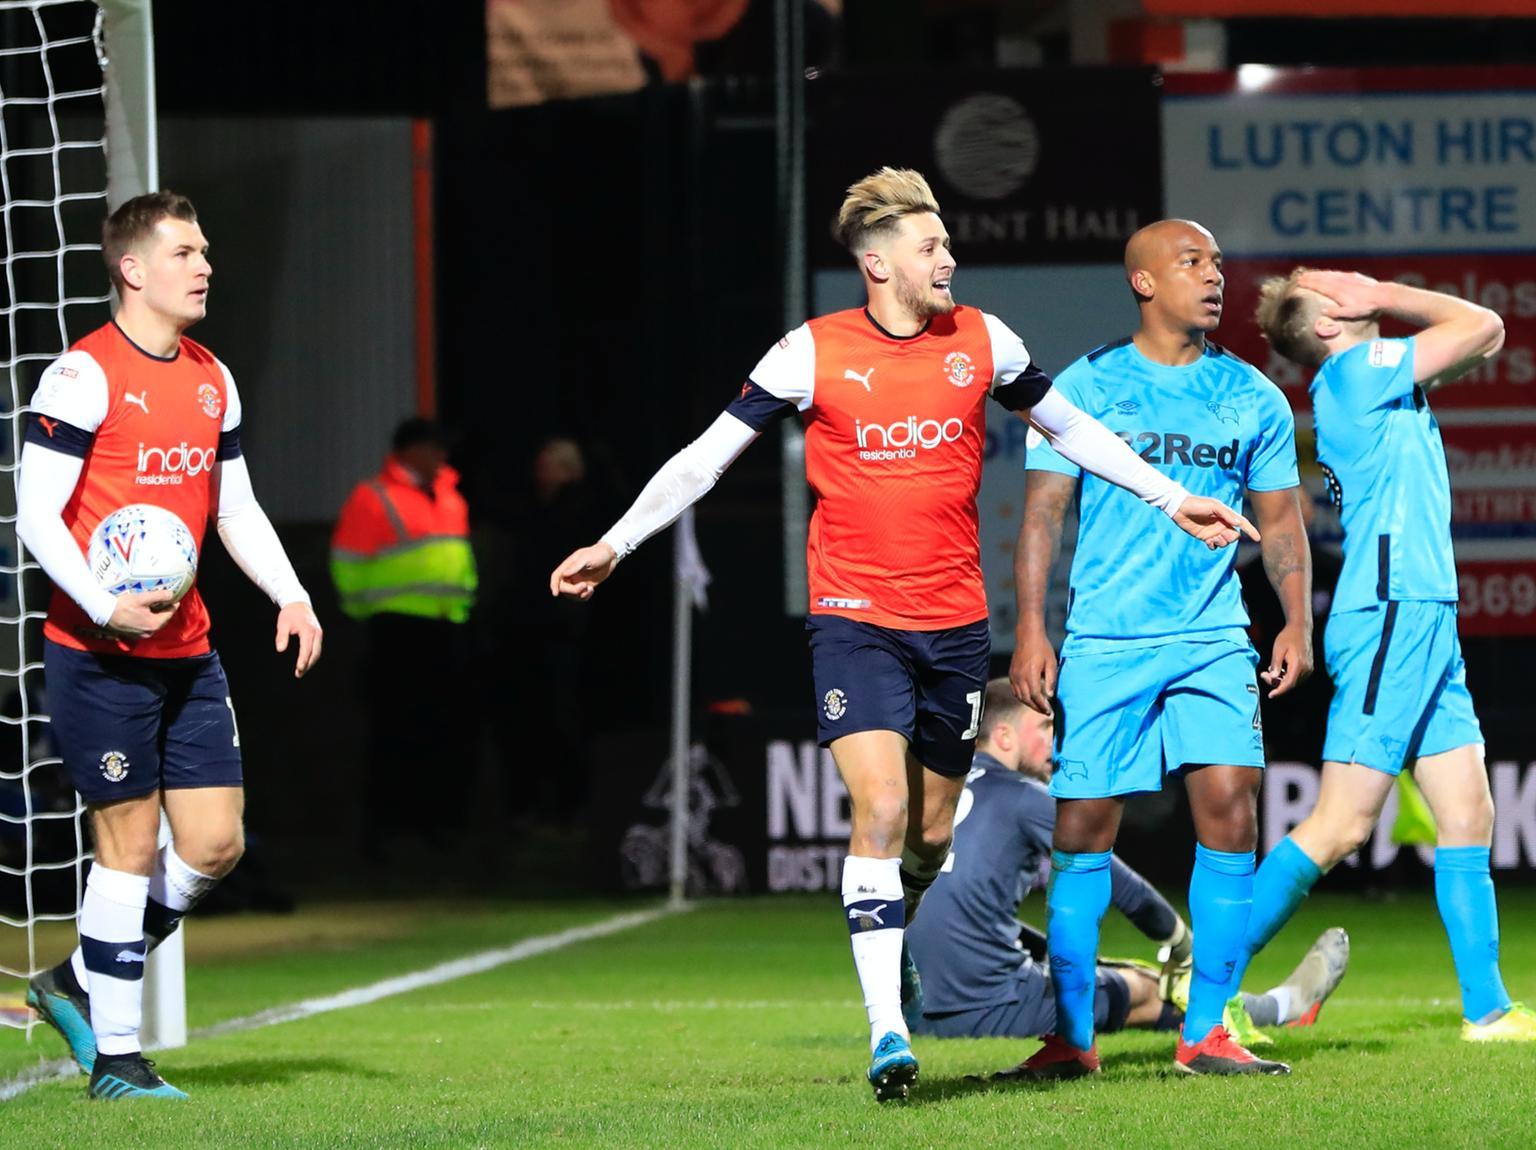 Pace was a real outlet for Luton and troubled the visiting defence all evening. Denied by Hamer three times, but kept on making the runs, and when found by Tunnicliffe, his cross was turned in Bogle to win it.